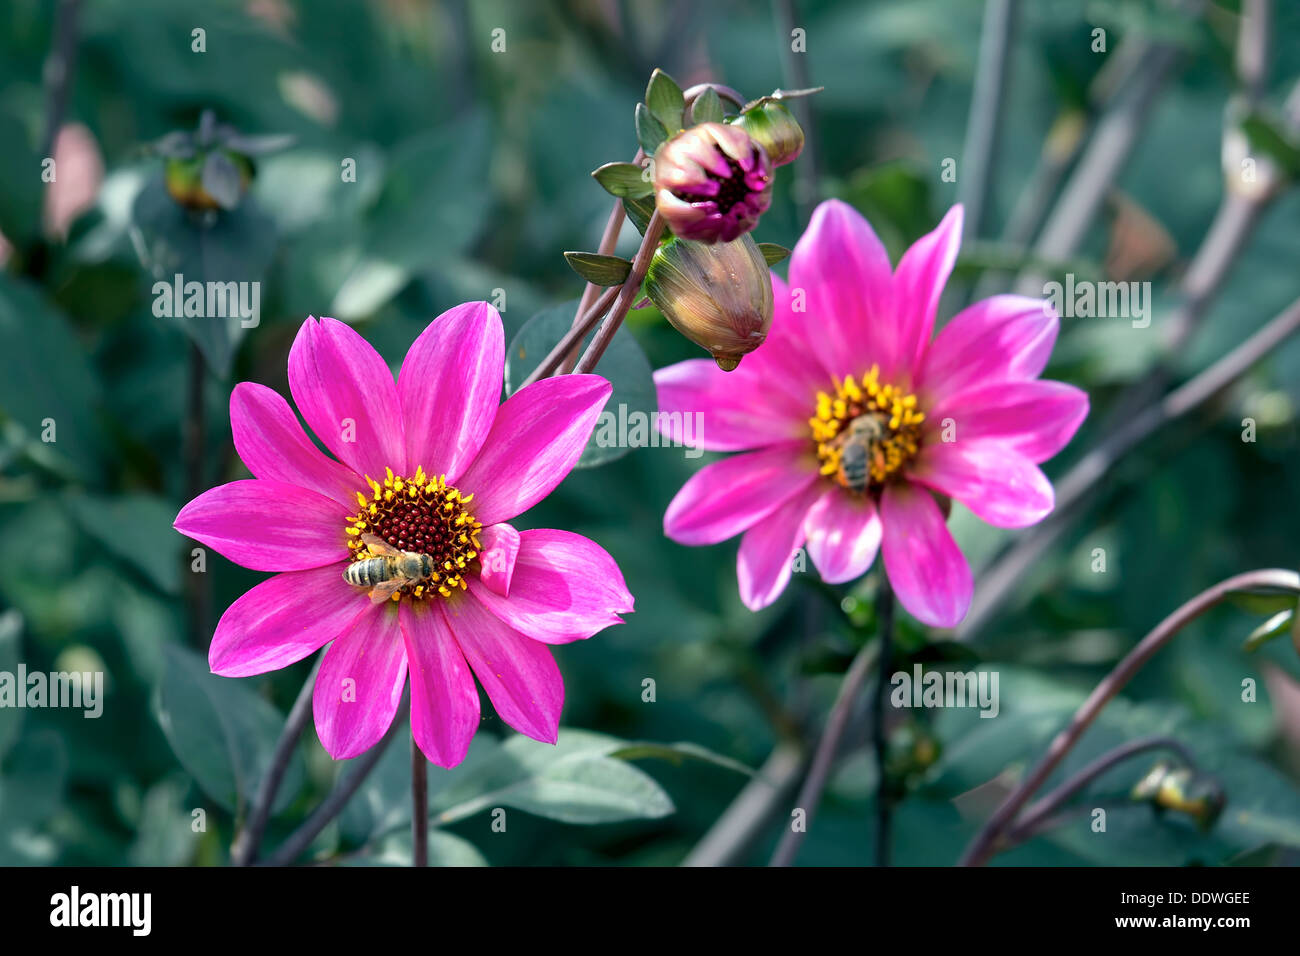 Pink Dahlia Flowers and Buds with Honeybees Closeup Stock Photo